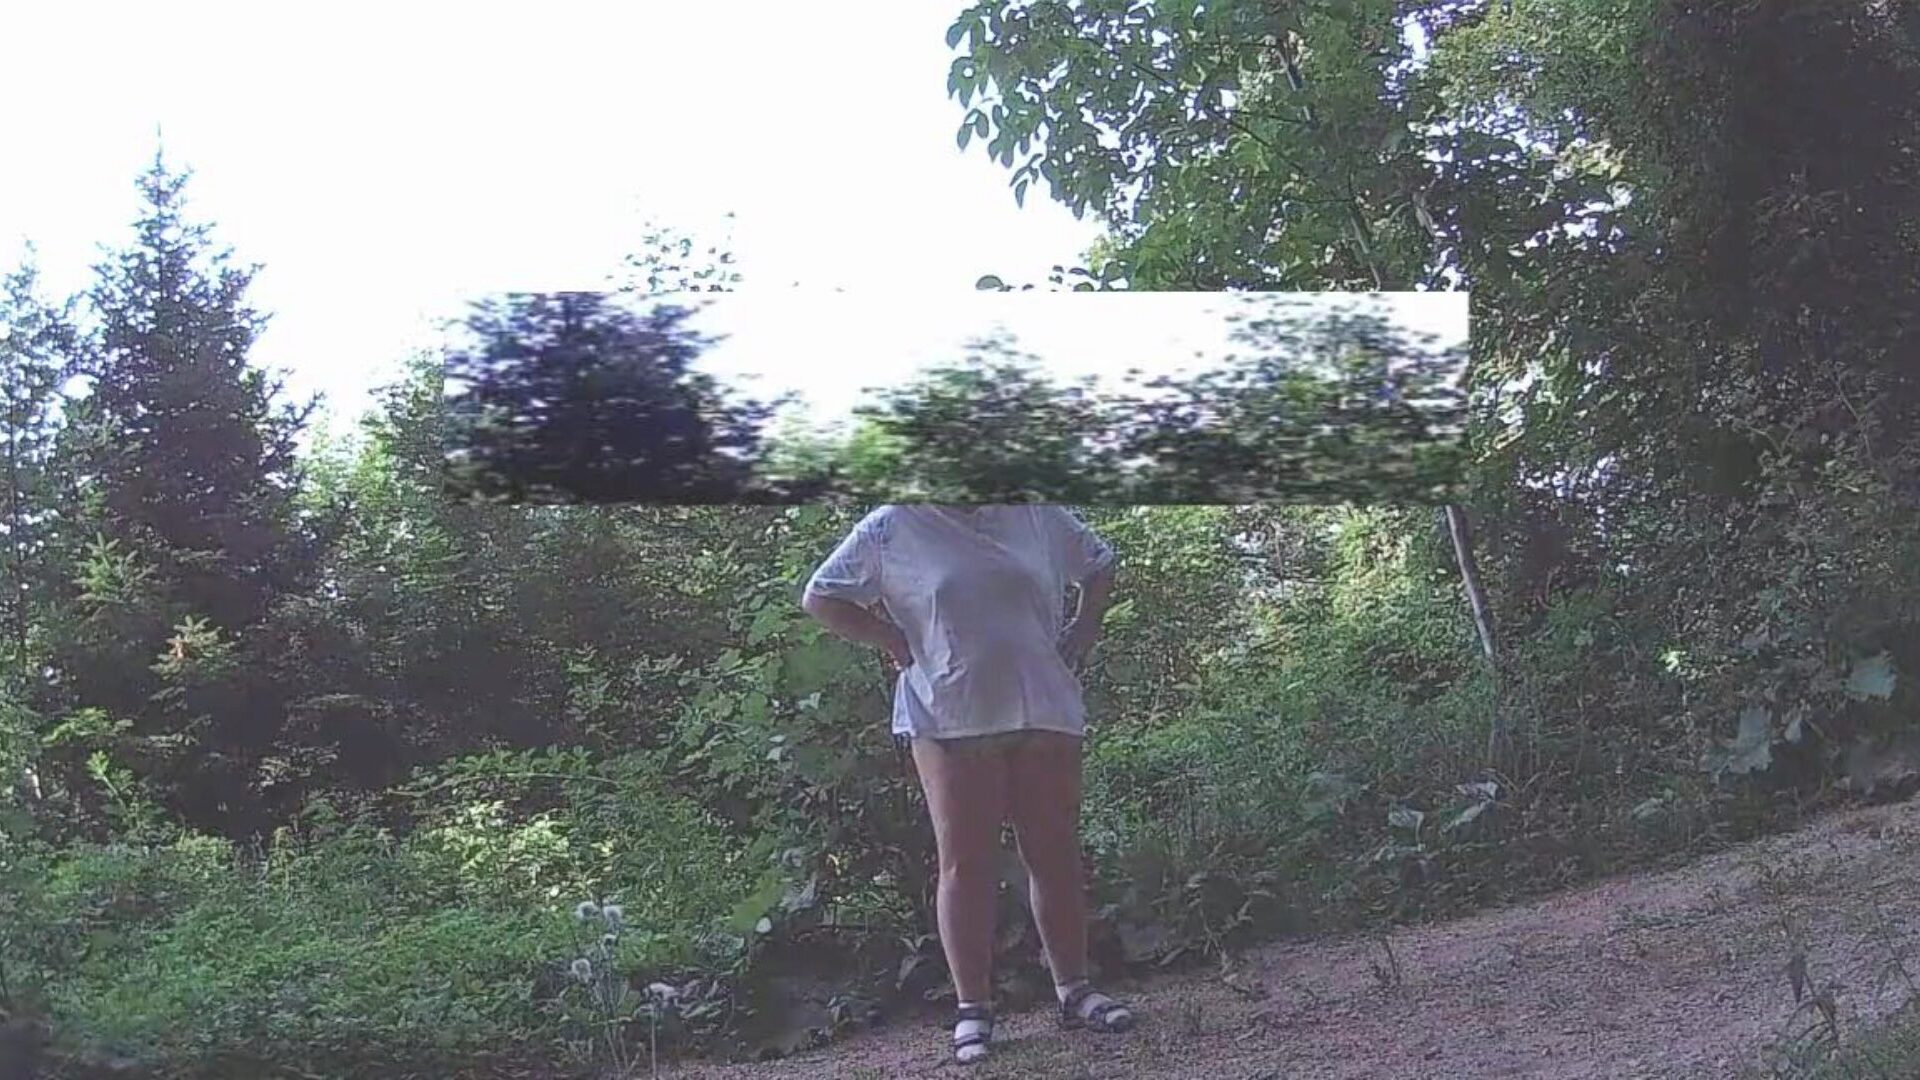 The oldie with his wifey in the woods (Not top quality) The oldie had the opportunity to record and kiss and hughing time outdoor. He is proud to share this with you